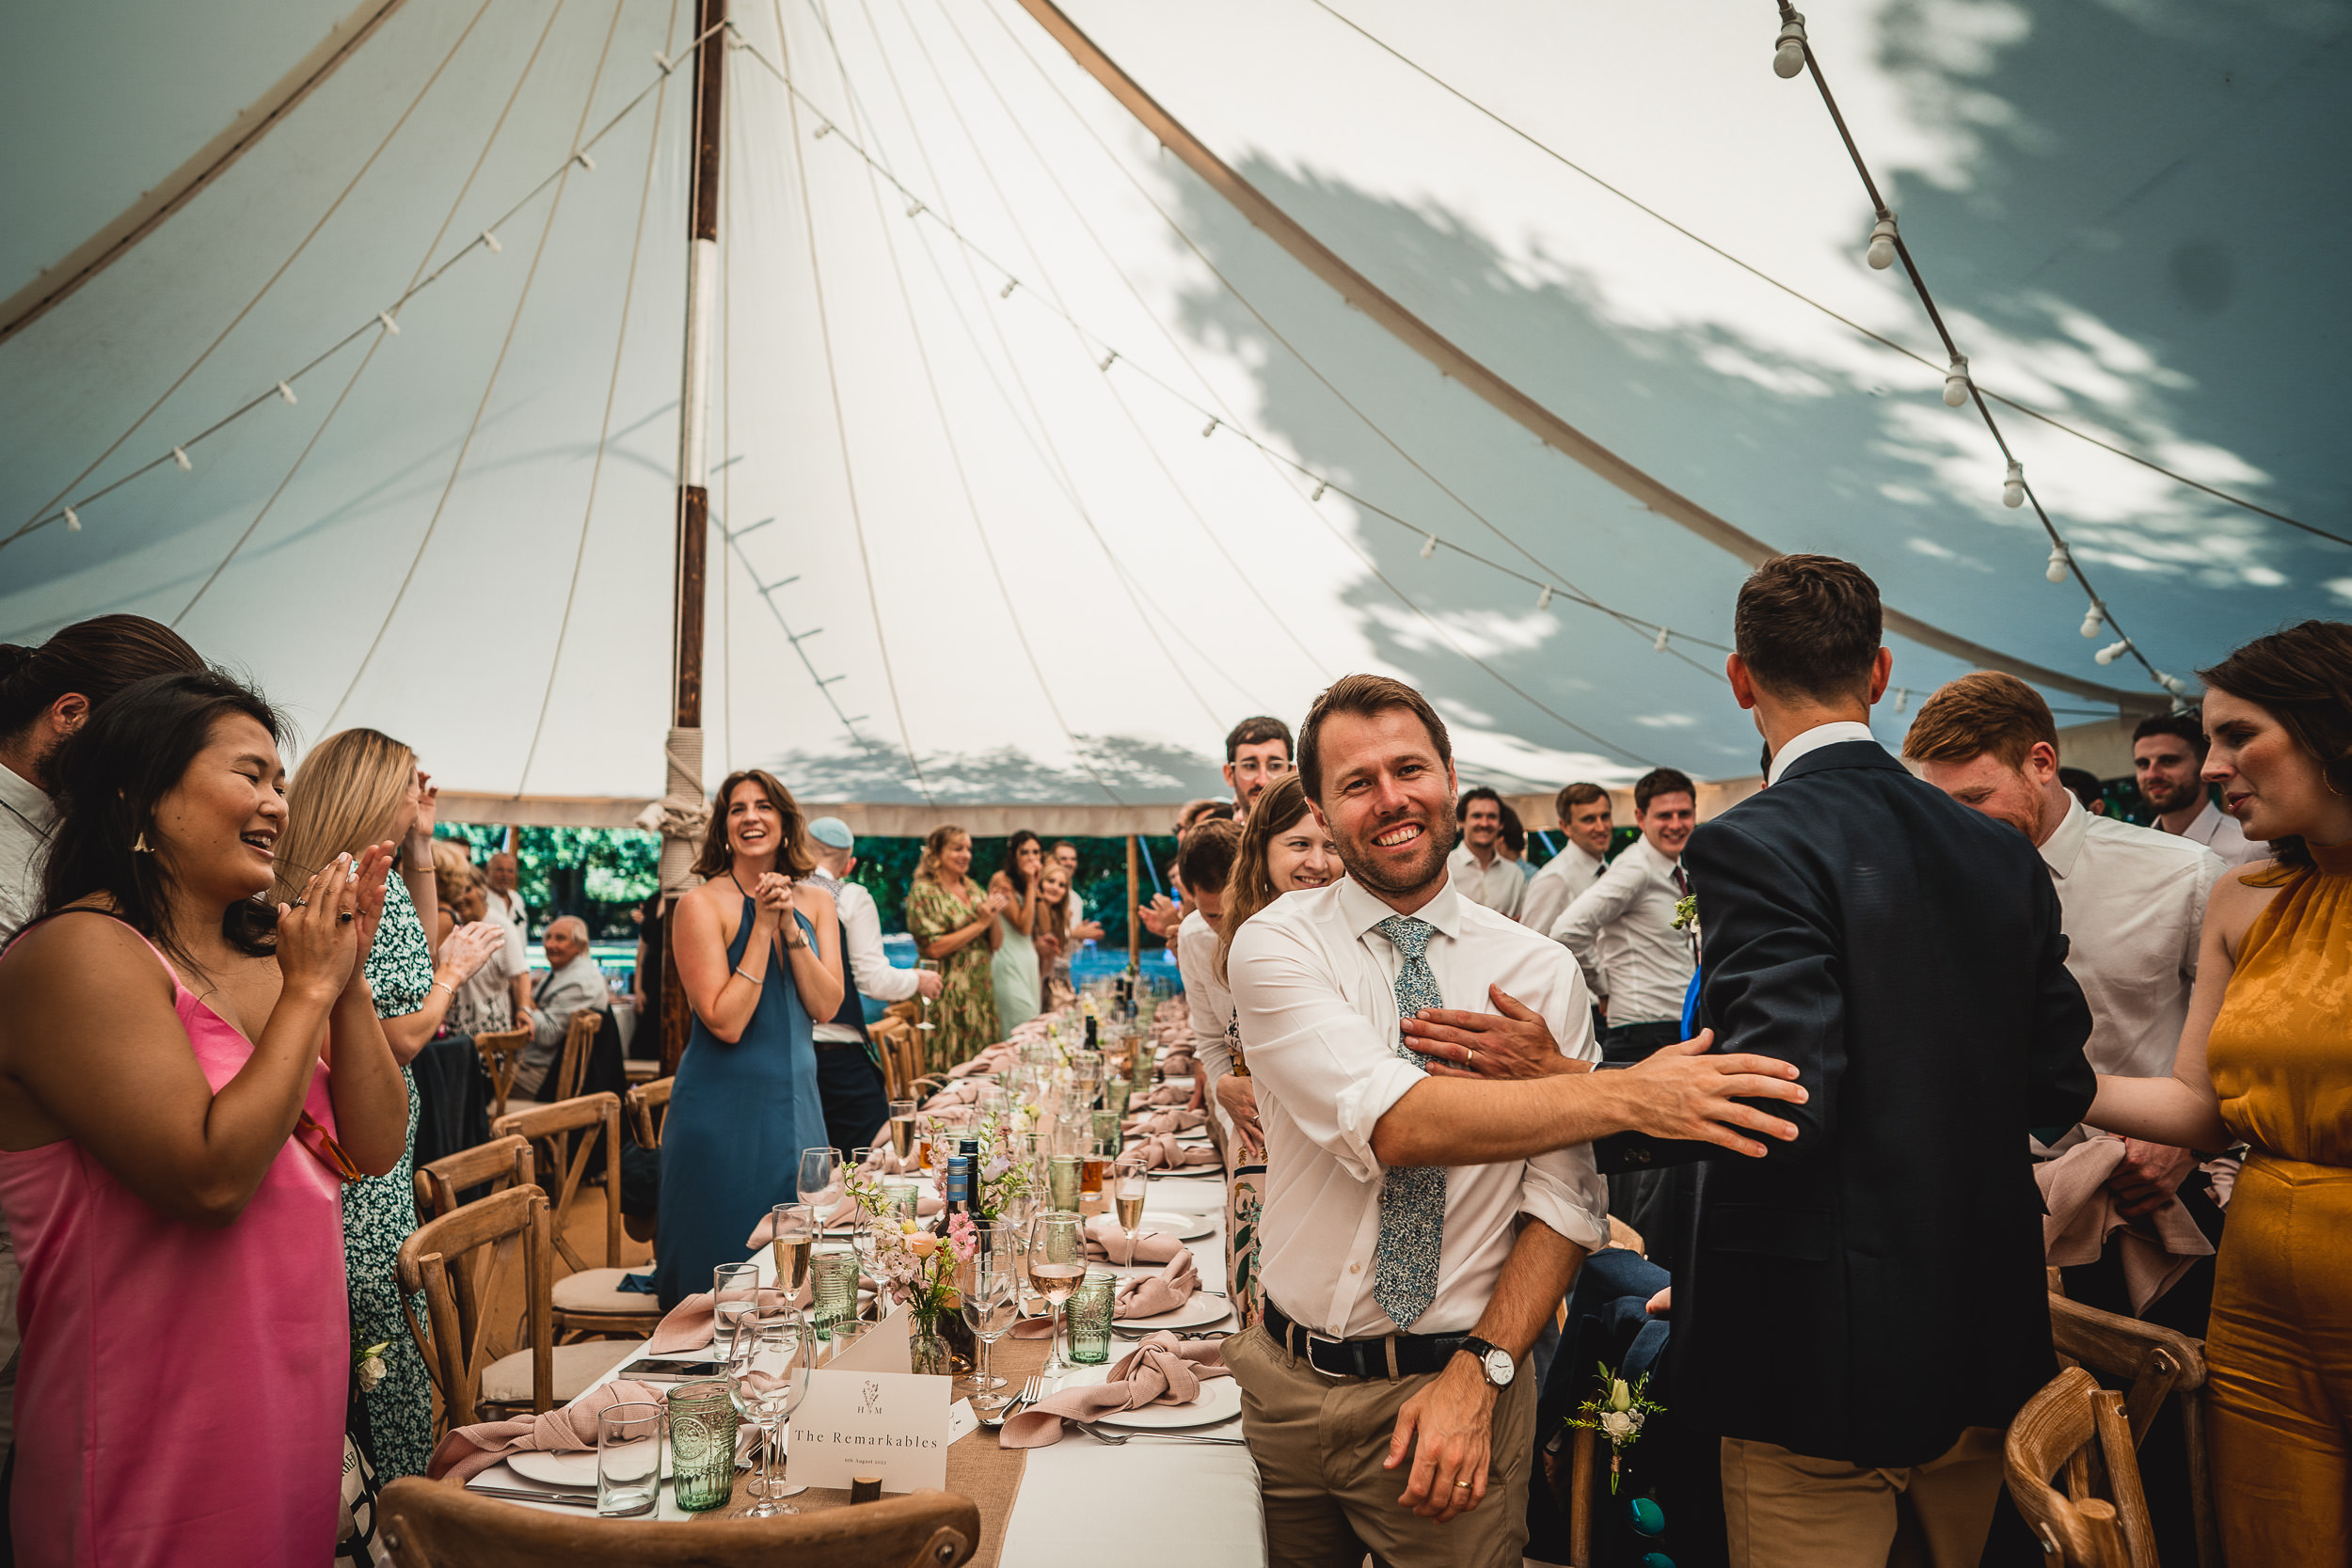 A wedding photographer captures joyful moments of the groom and guests at a reception in a tent.